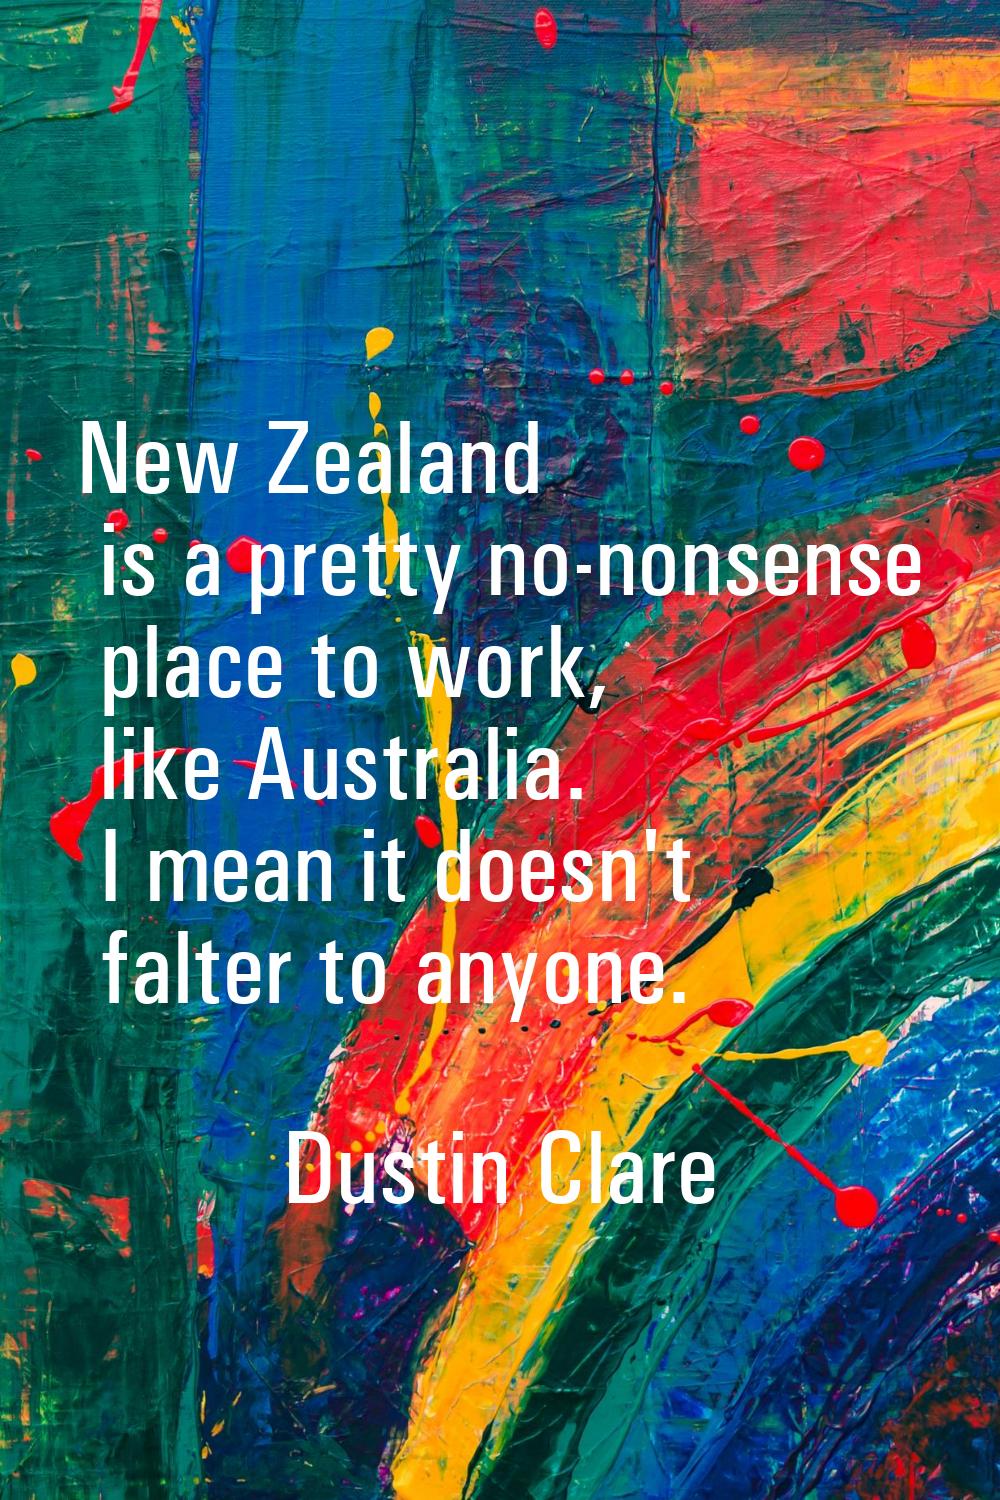 New Zealand is a pretty no-nonsense place to work, like Australia. I mean it doesn't falter to anyo